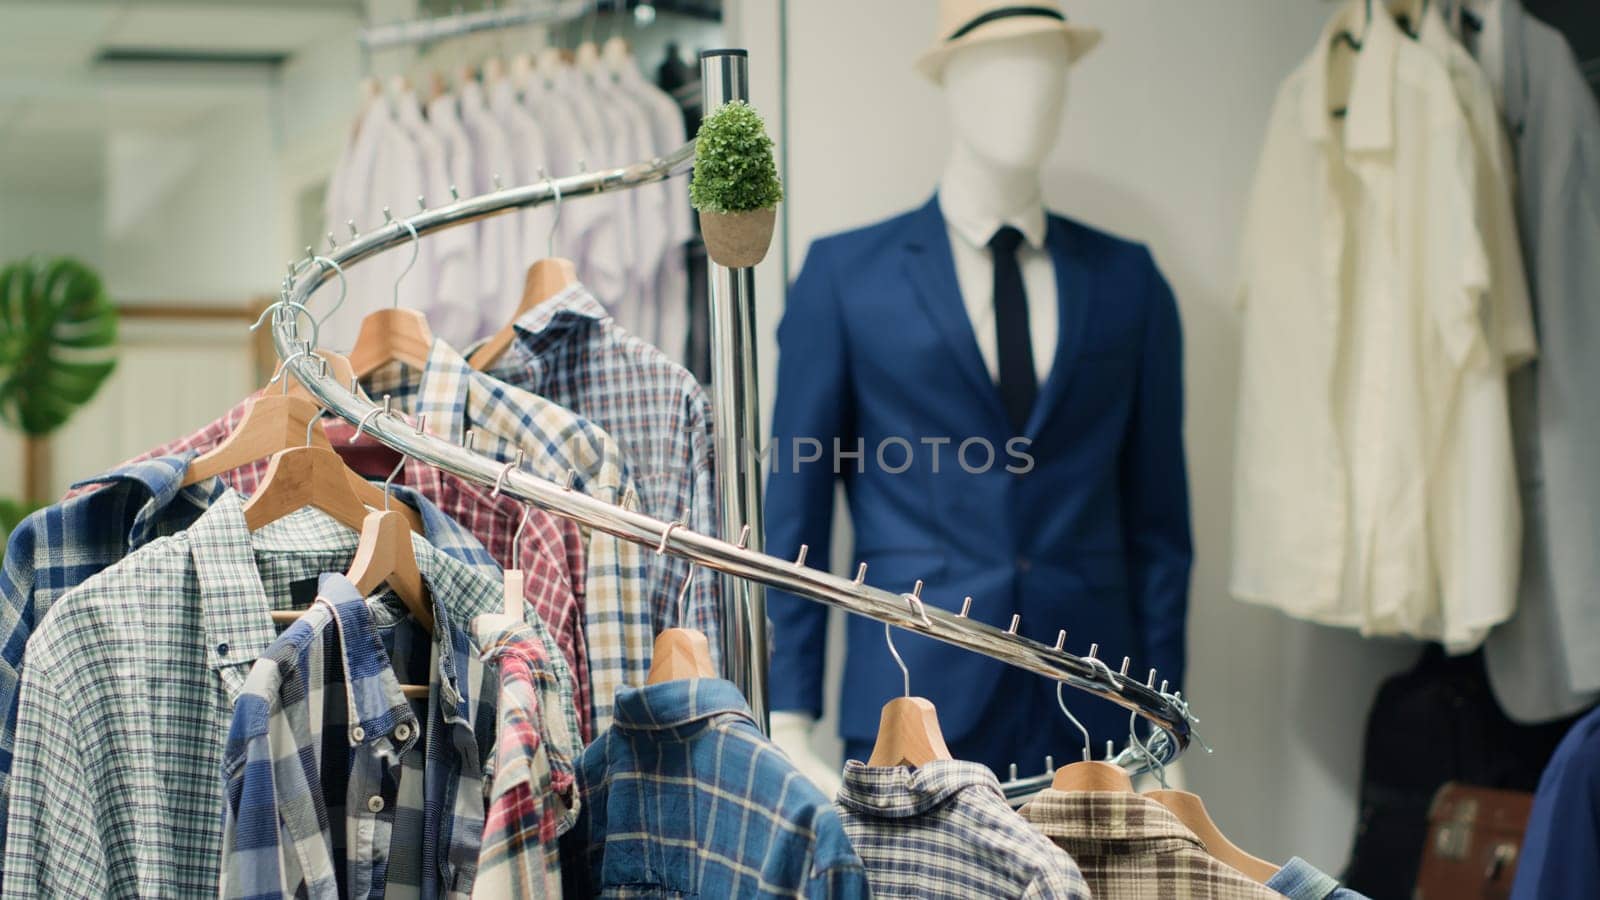 Elegant selection of shirts on hangers by DCStudio